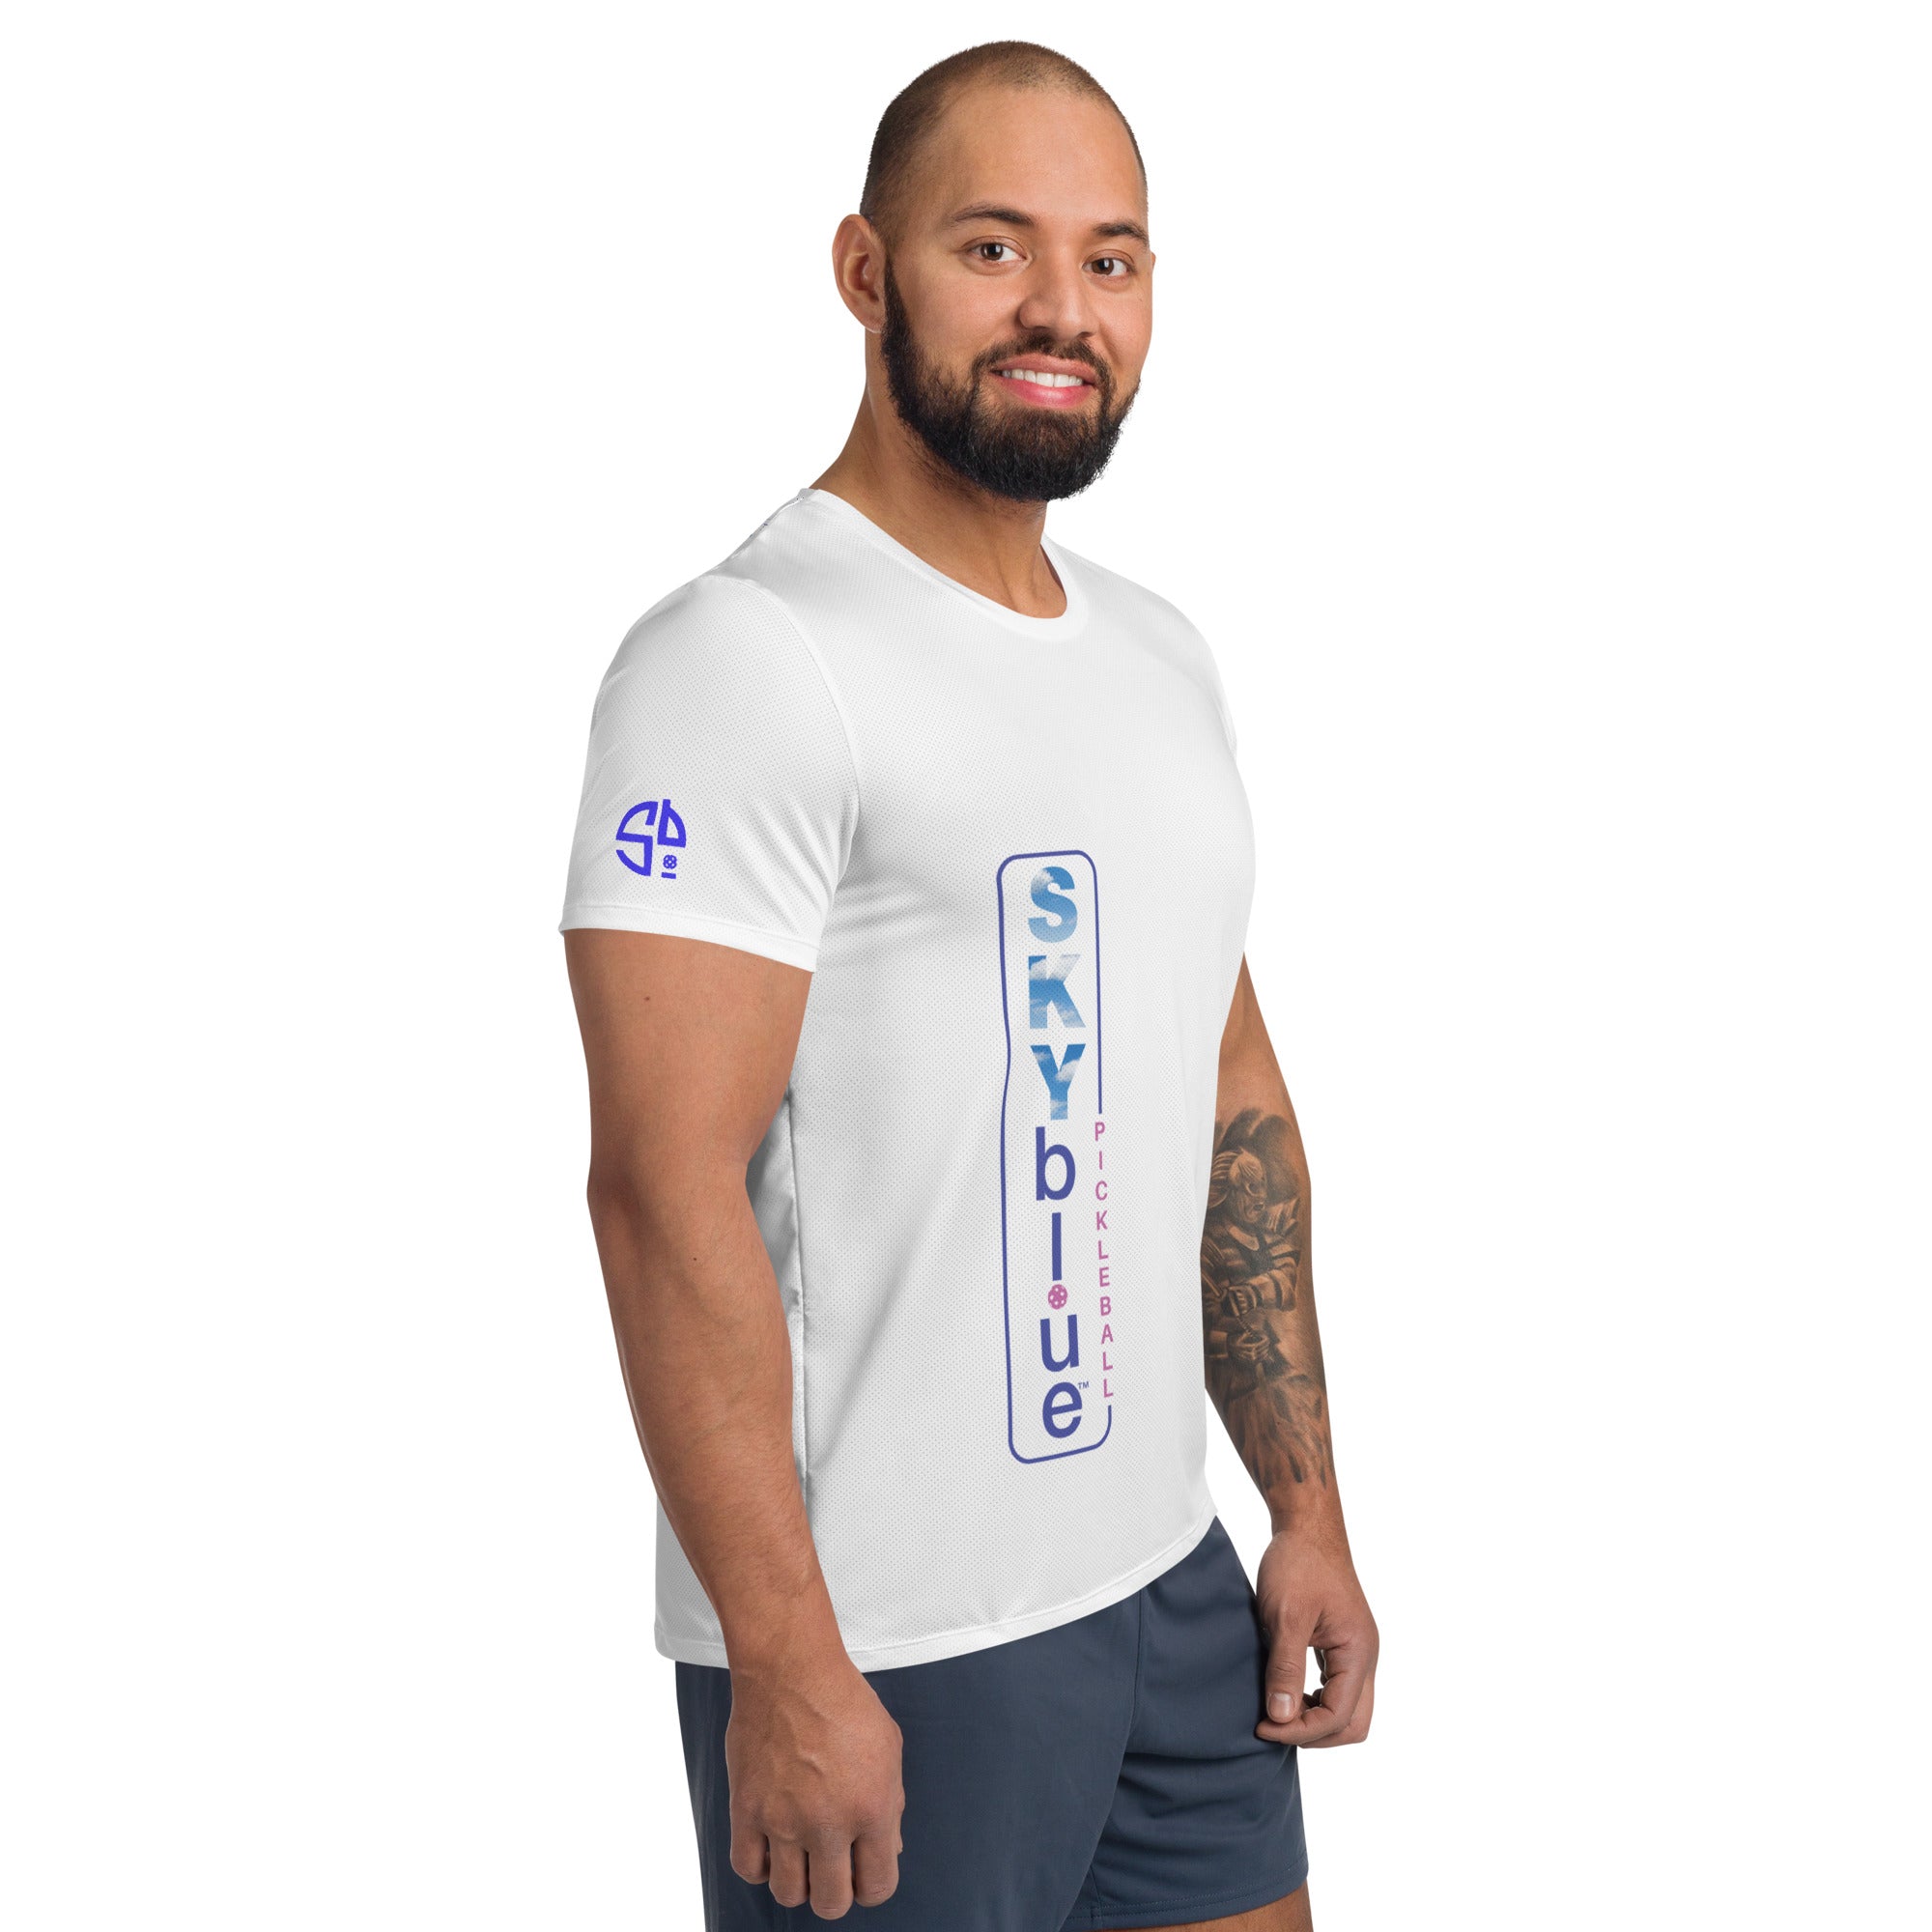 Play Pickleball in Style! SKYblue™ for Got Pla(yed)id© Black, White, Blue & Pink Men's Performance Athletic Short Sleeve Shirt w/MaxDri & MicroBlok